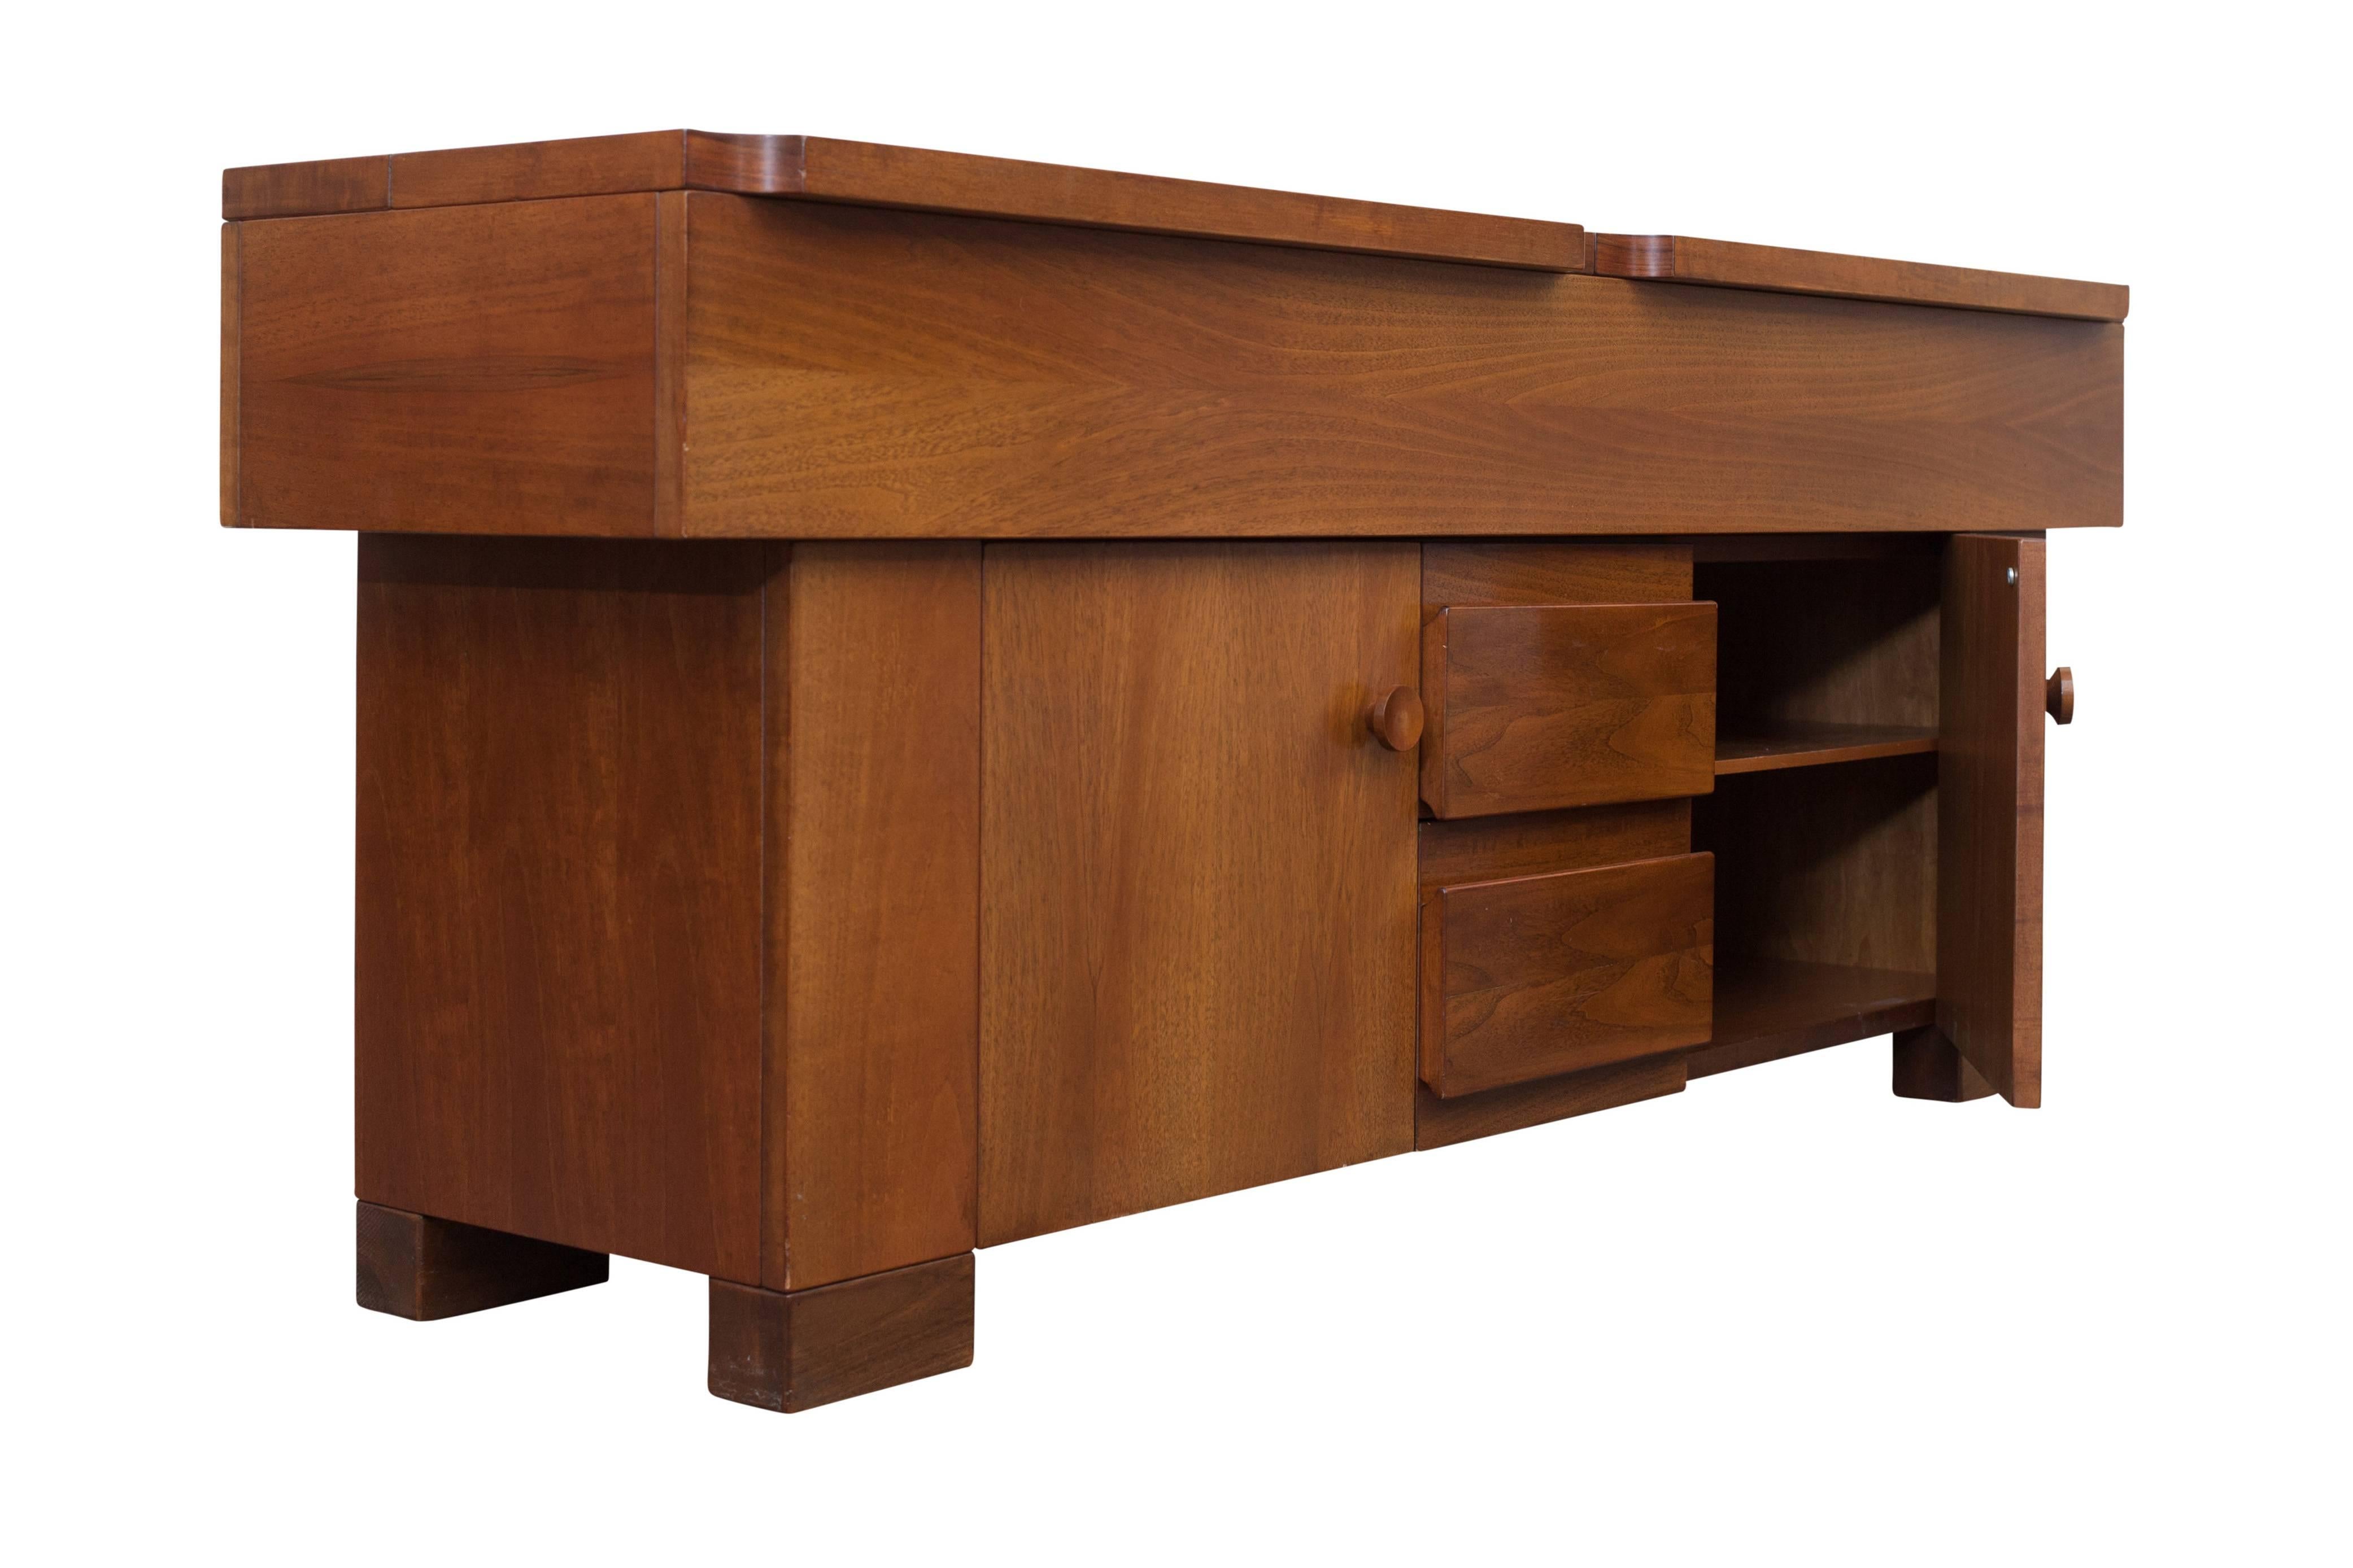 Modern sideboard in walnut designed by the Italian Architect Giovanni Michelucci.

The piece is equipped with several cabinet doors, shelves and a split foldable top with plenty
of storage space underneath. The concave curved corners are stunning